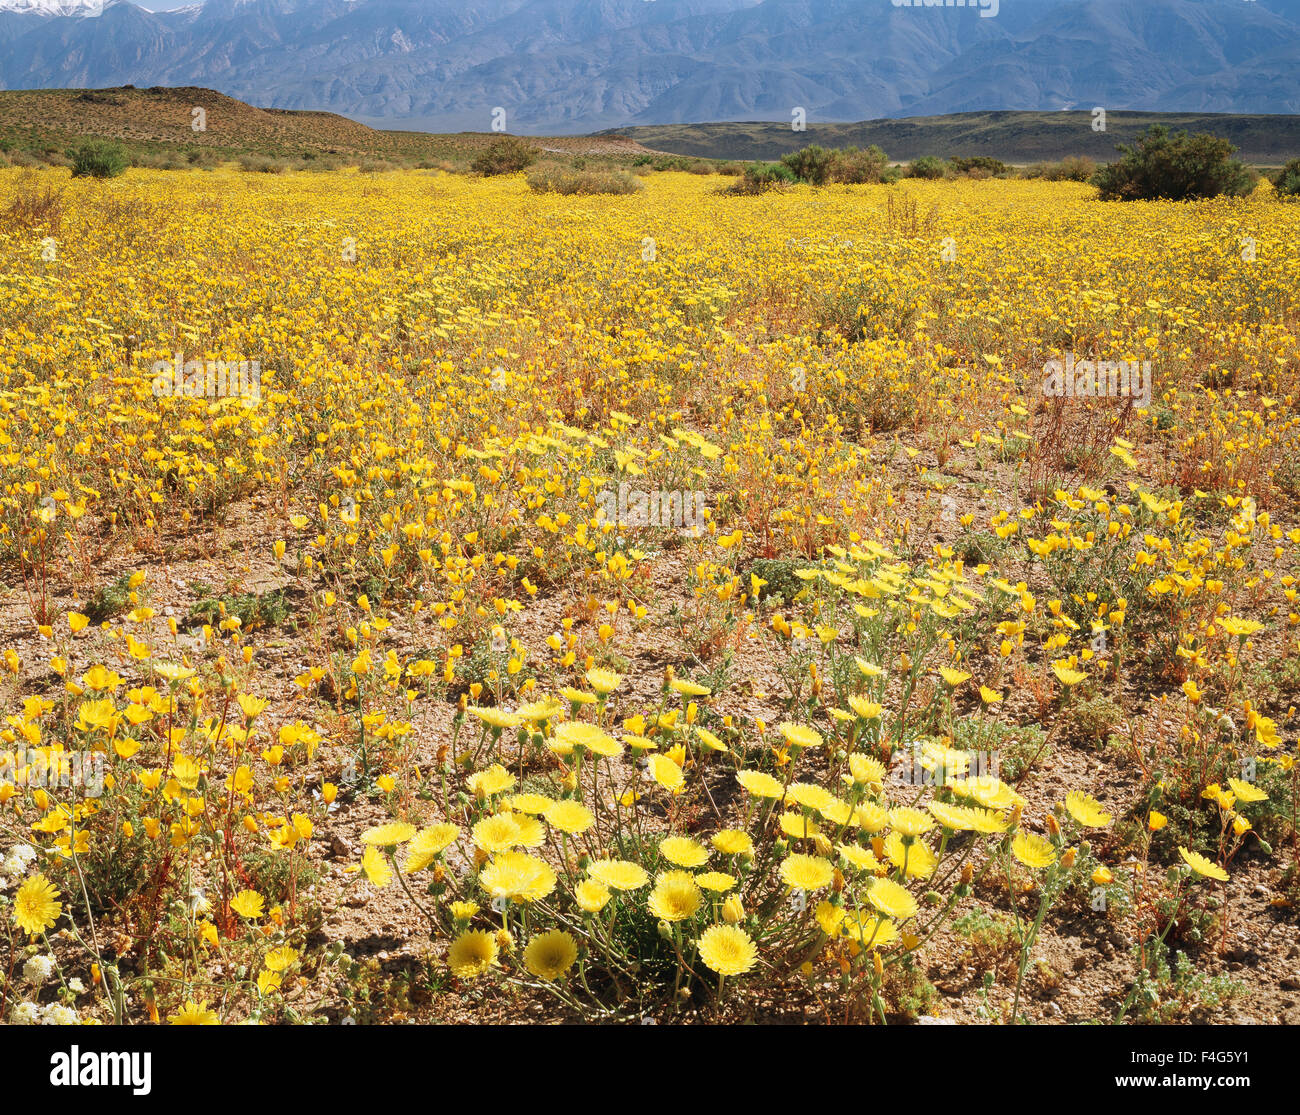 California, Owens Valley, Desert Dandelion (Malacothrix glabrata) in a field of Sun Cups wildflowers (Camissonia brevipes ) below the White Mountains. (Large format sizes available) Stock Photo